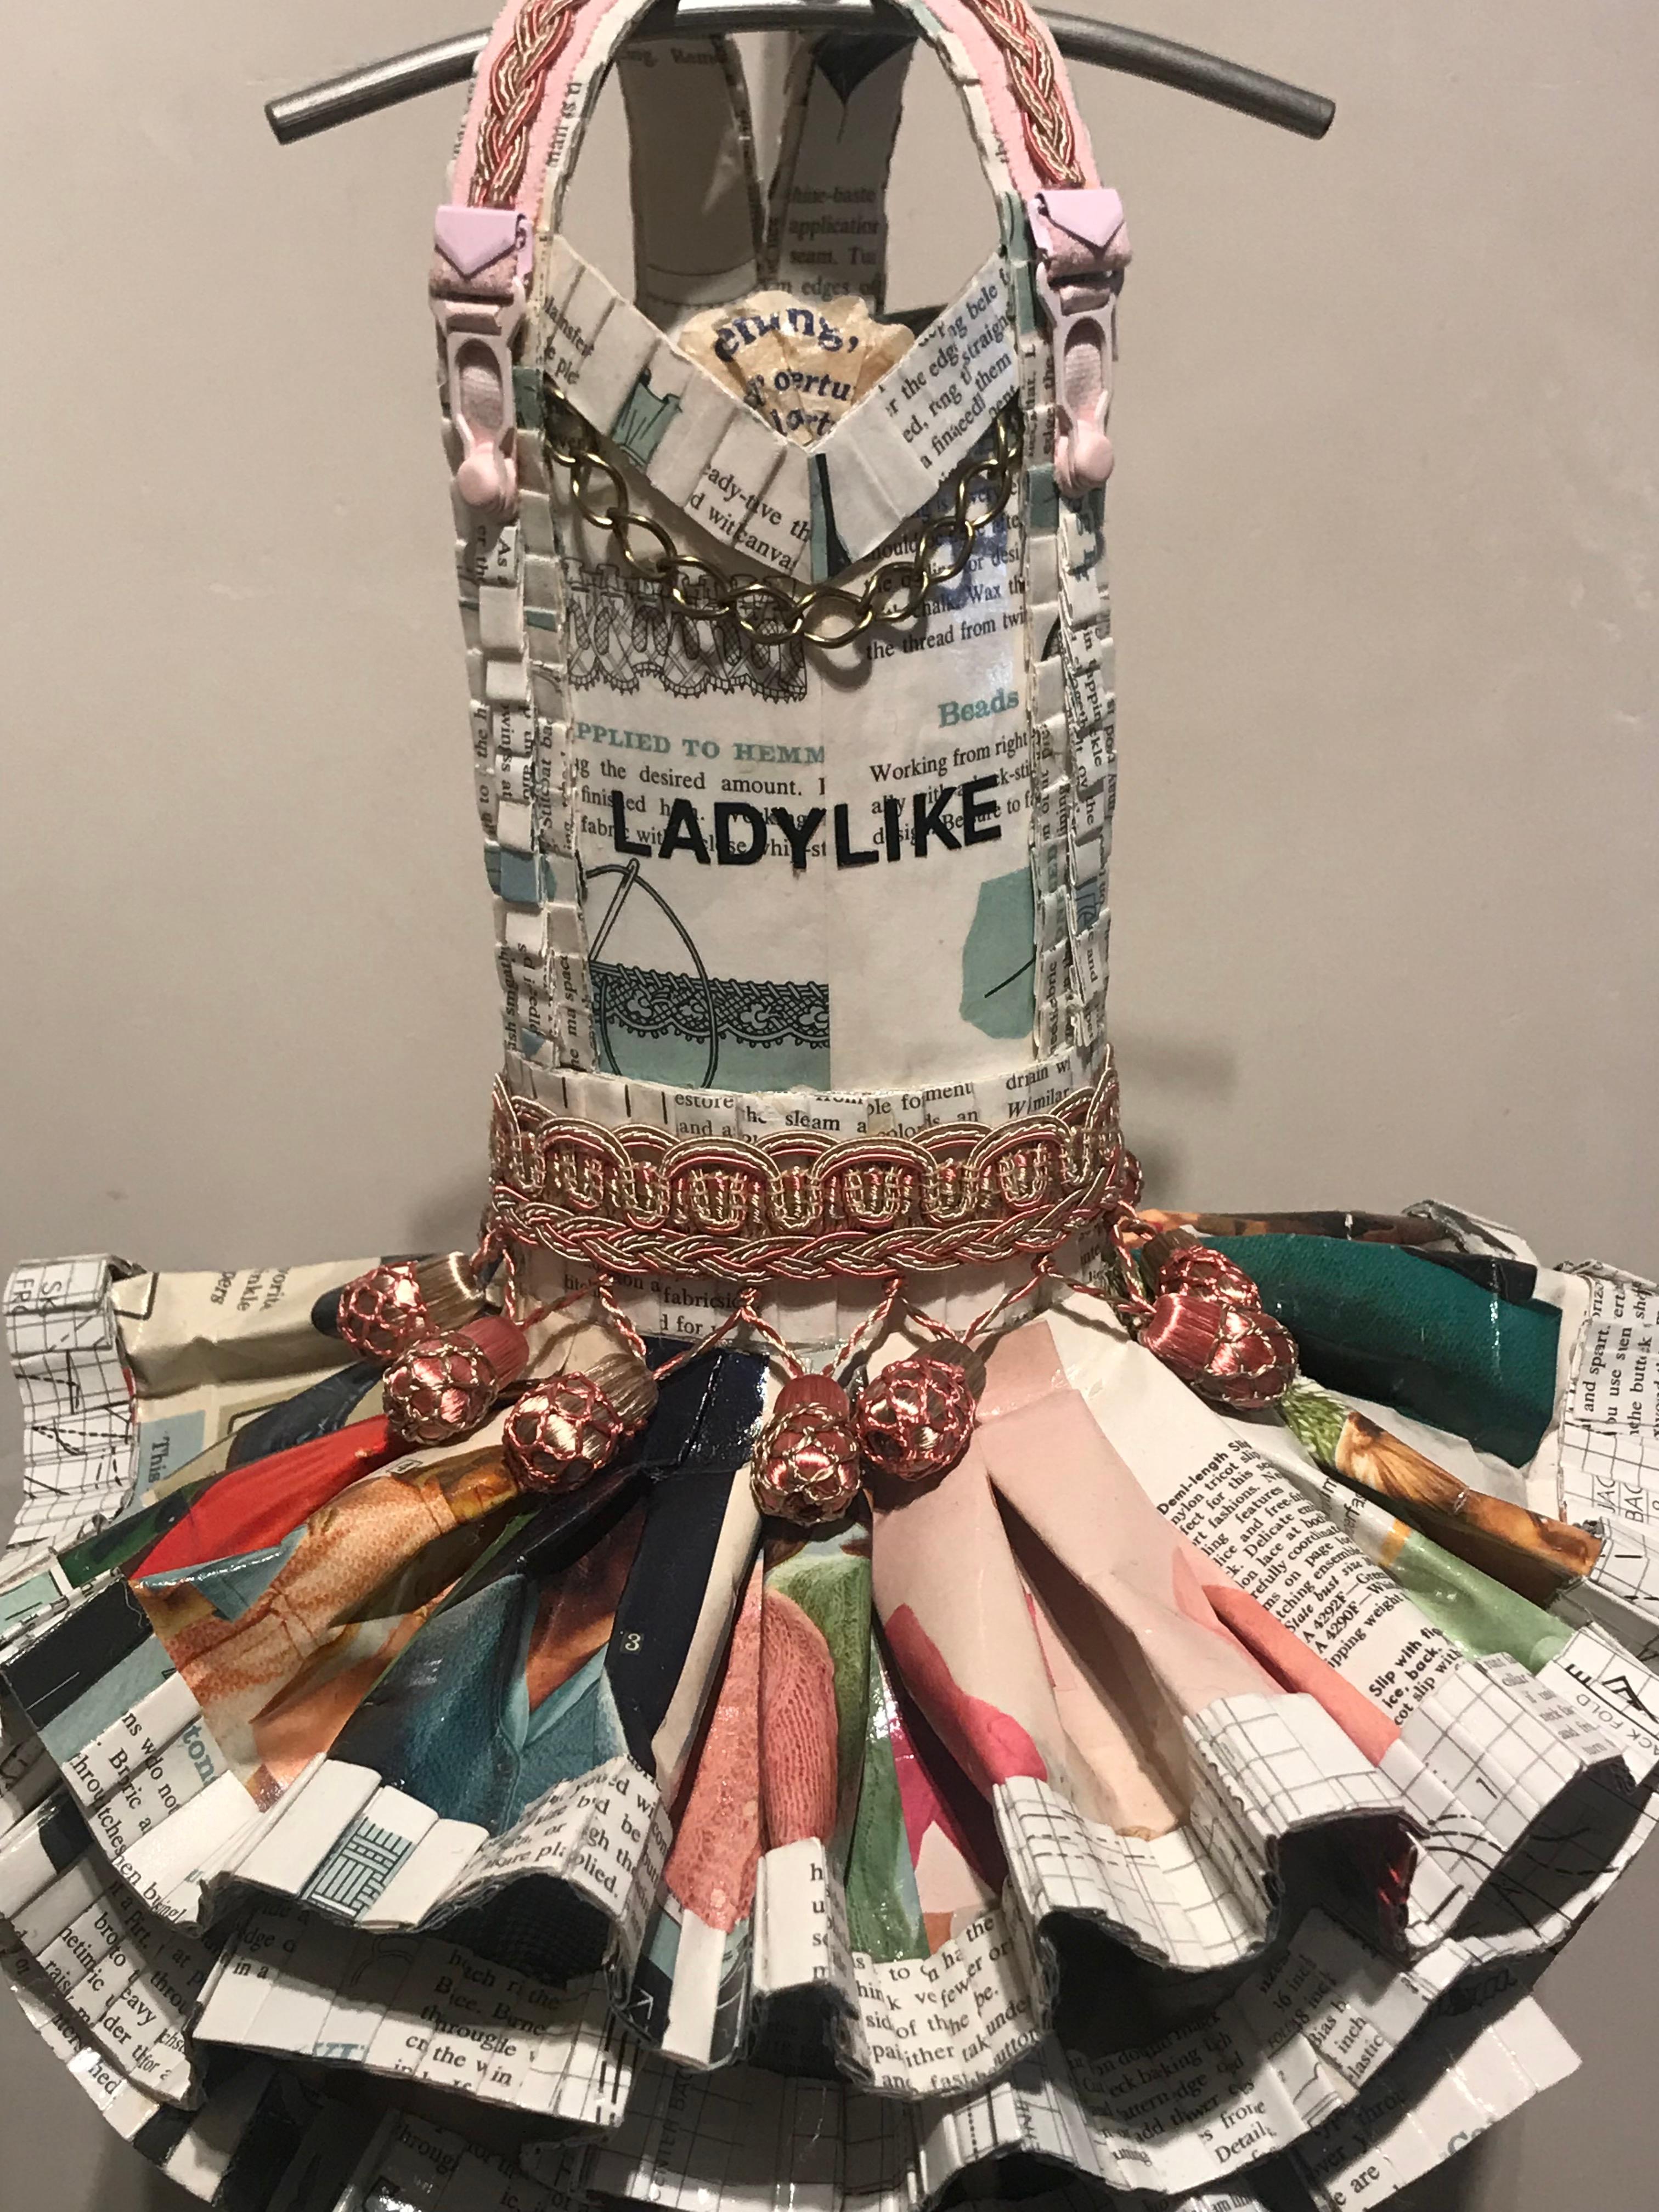 Donna Rosenthal is a mixed media artist, who utilizes materials that bridge the gap between art and craft with her sculptures. Most often this consists of deconstructing vintage textiles and printed papers, such as magazines, comic books, cookbooks,